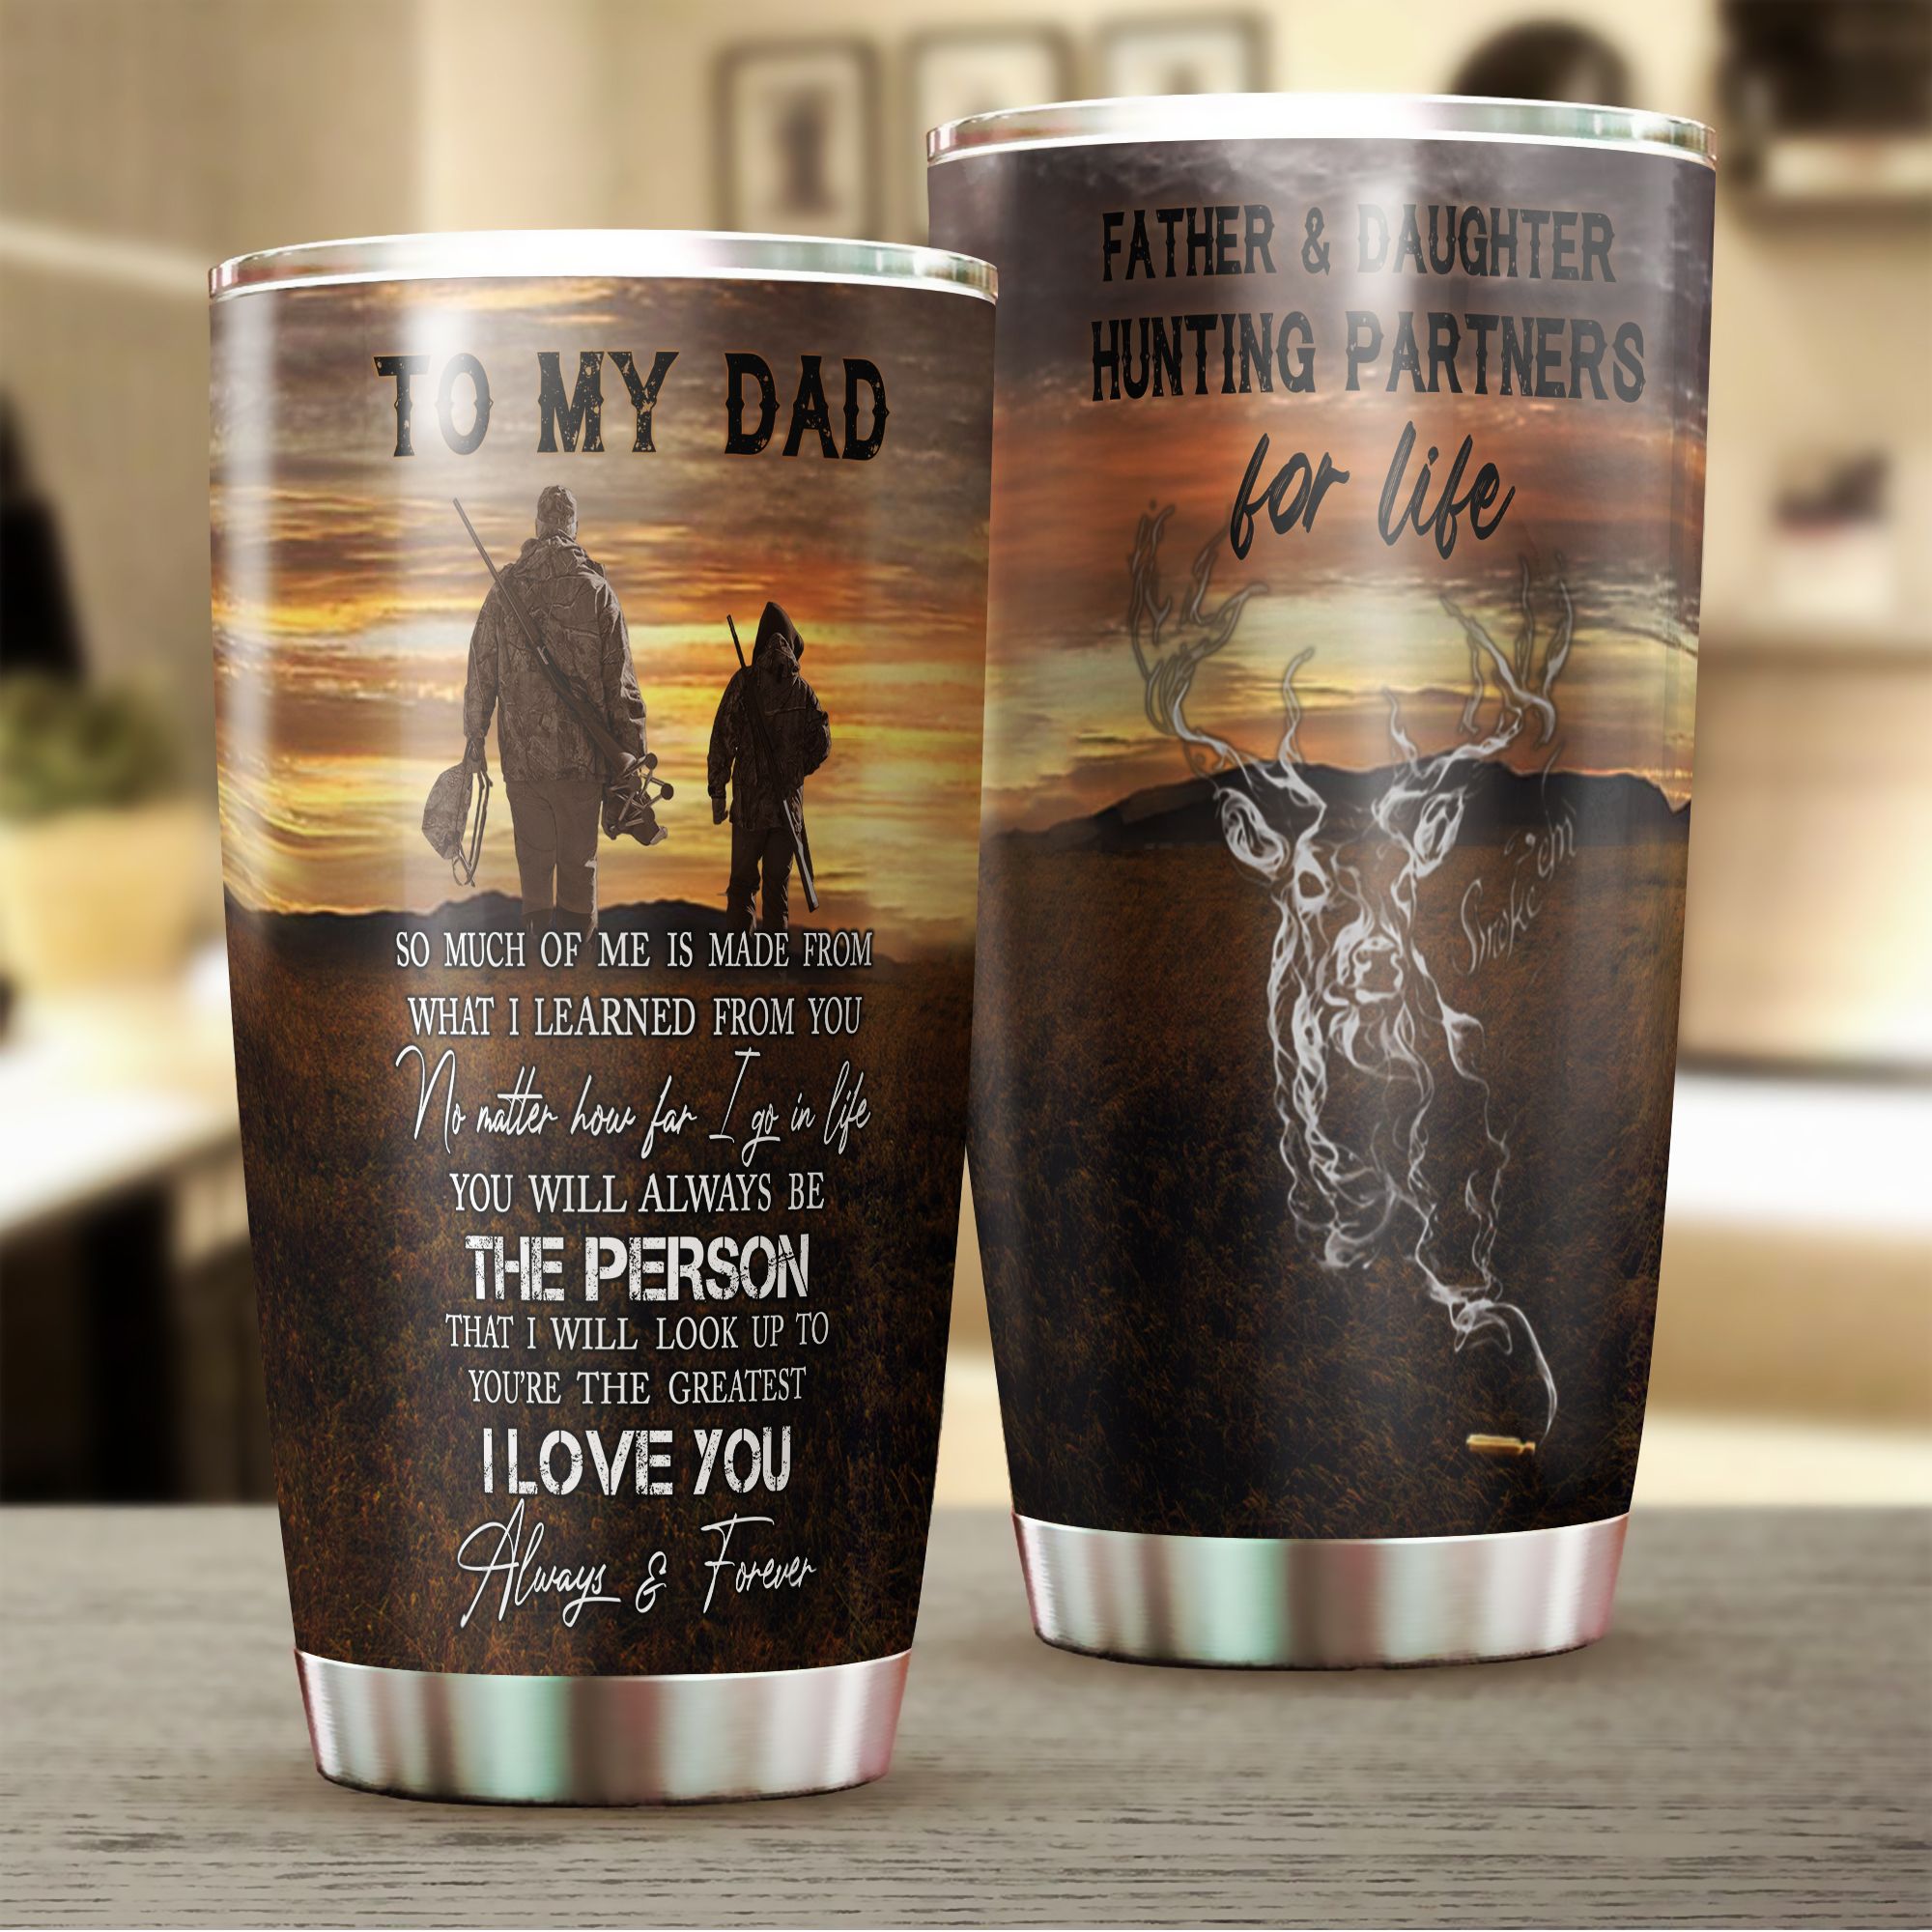 Gift For Dad From Daughter Father And Daughter Hunting Partners For Life Deer Hunting Tumbler PAN